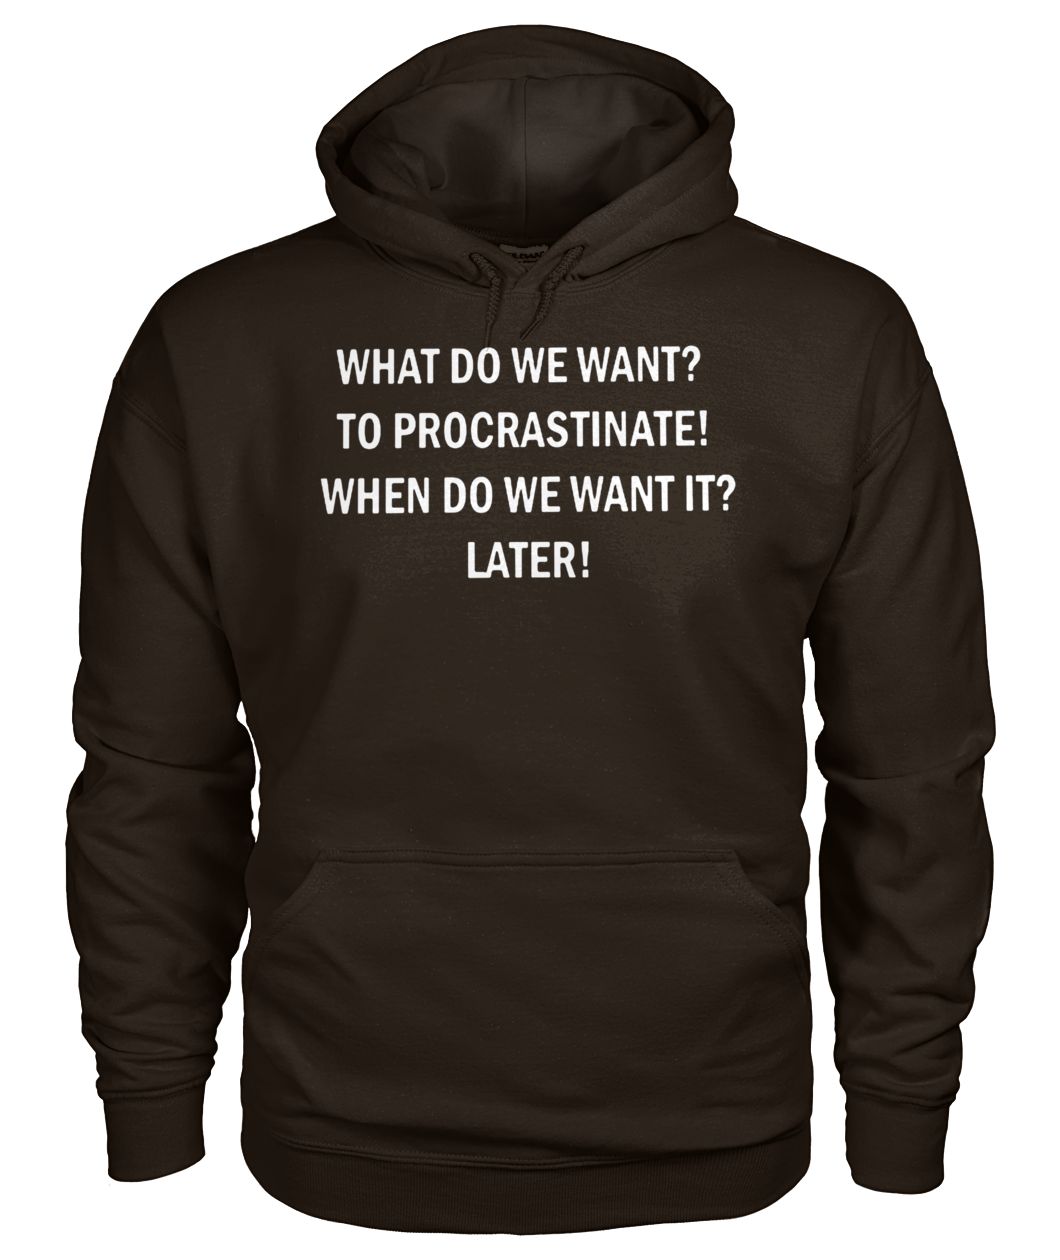 What do we want to procrastinate when do we want it later hoodie